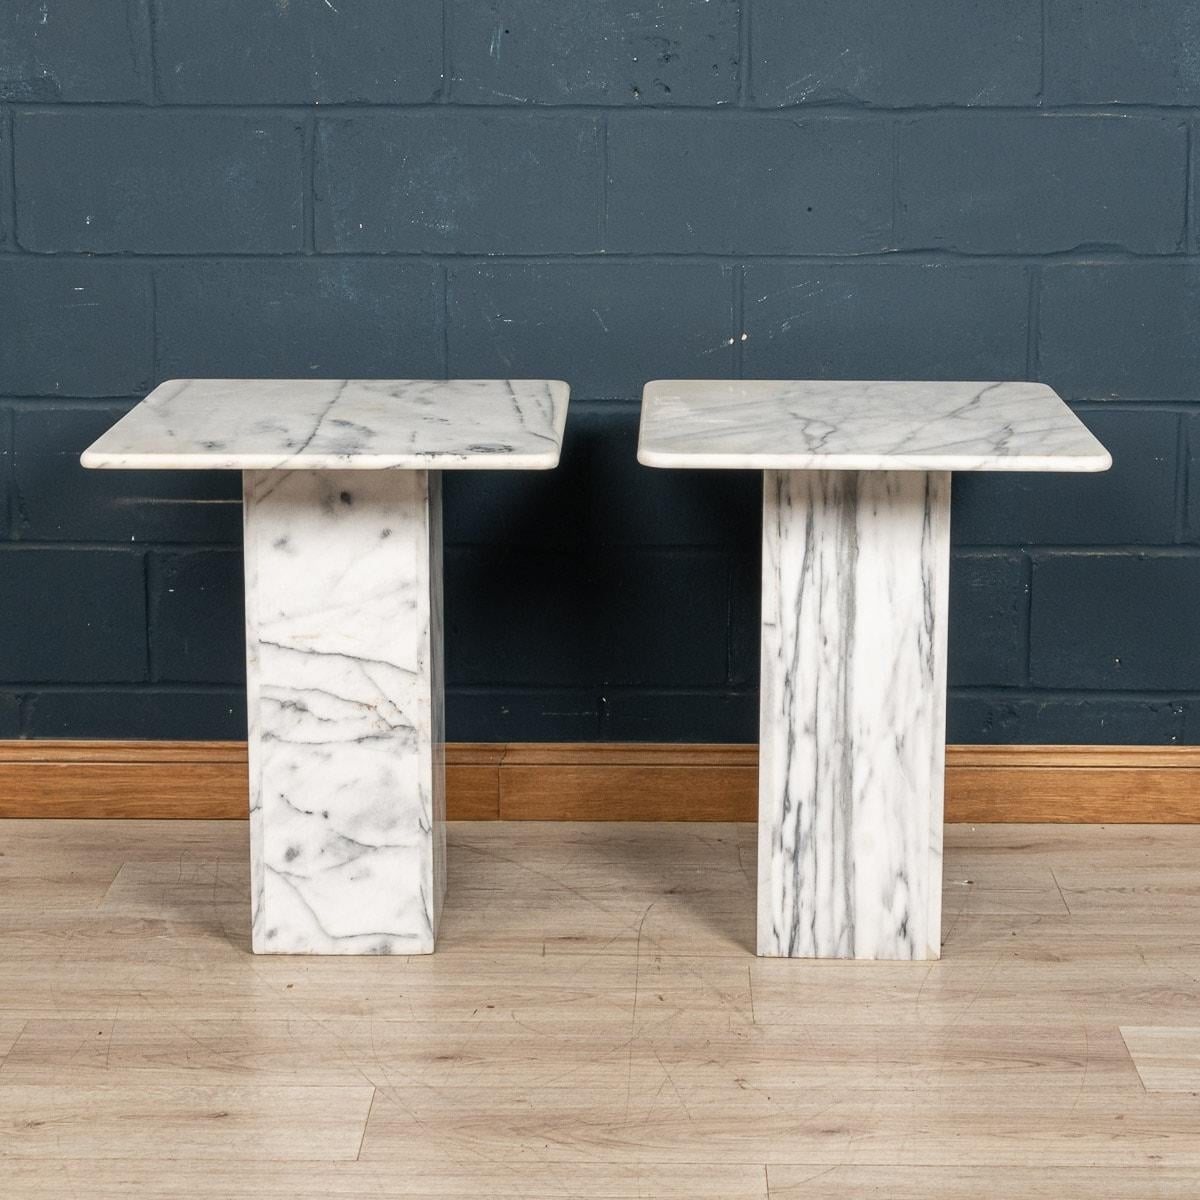 A lovely pair of tall marble side tables, made in Italy in the latter part of the 20th century. This impressive side table is composed by five individually polished slabs of Calacatta marble, conjoined to make a striking item of furniture. Together